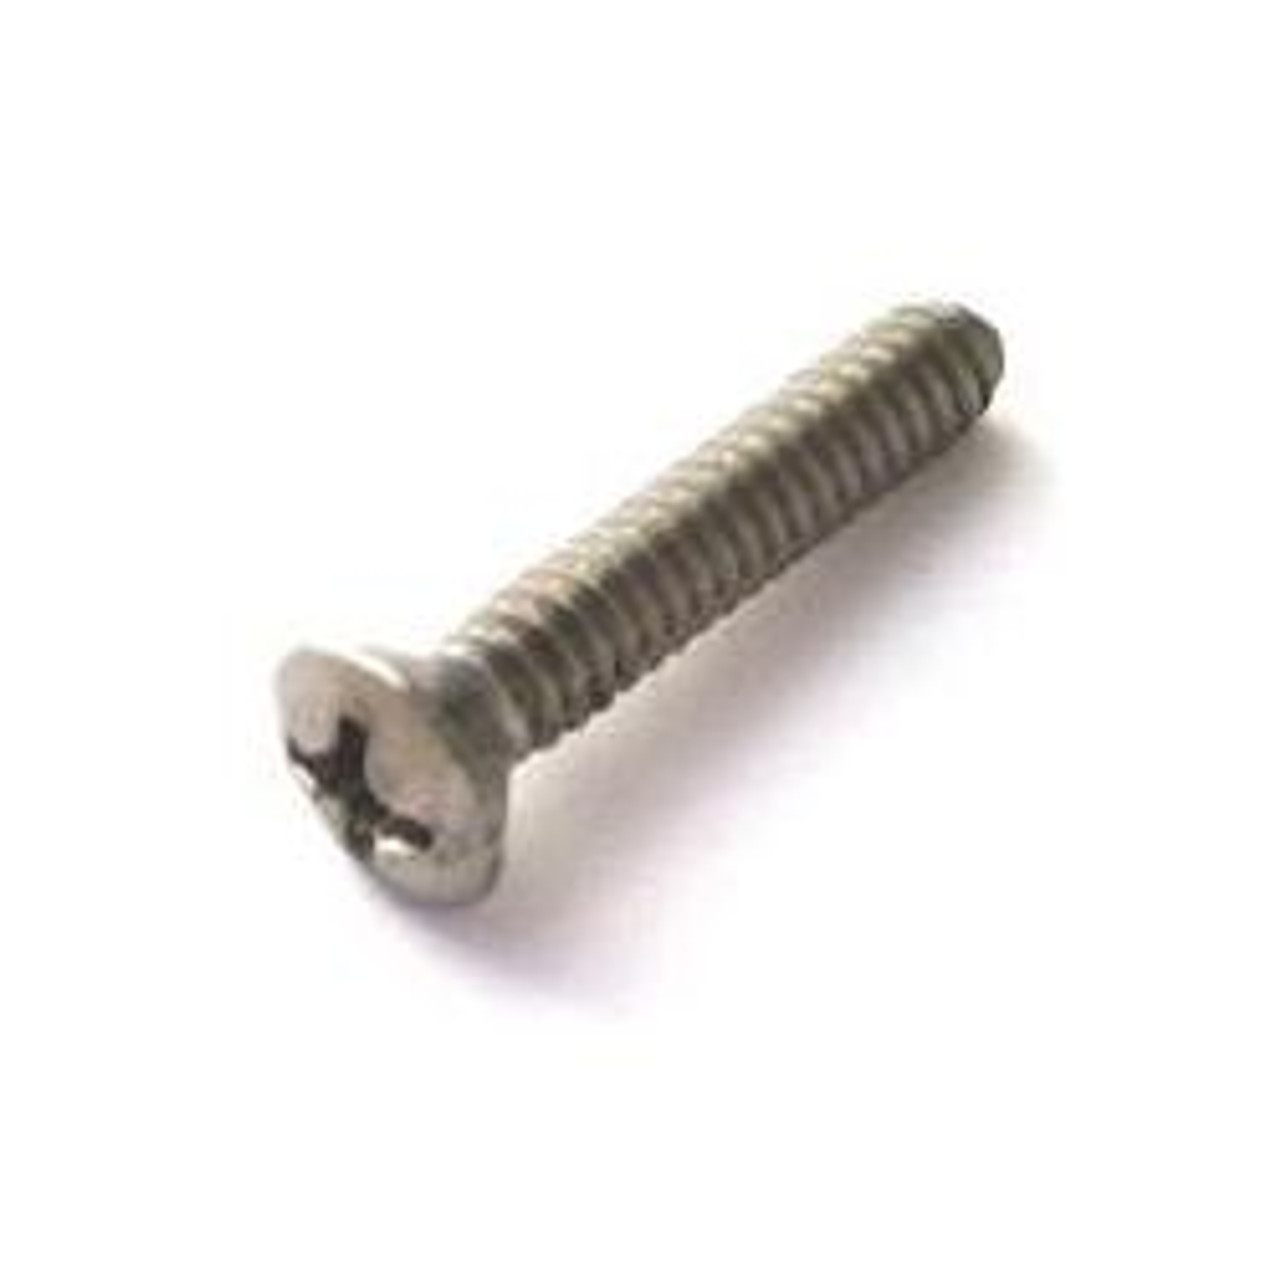 Pickup Mounting Screws - #6-32x3/4", Phillips, Oval, Stainless